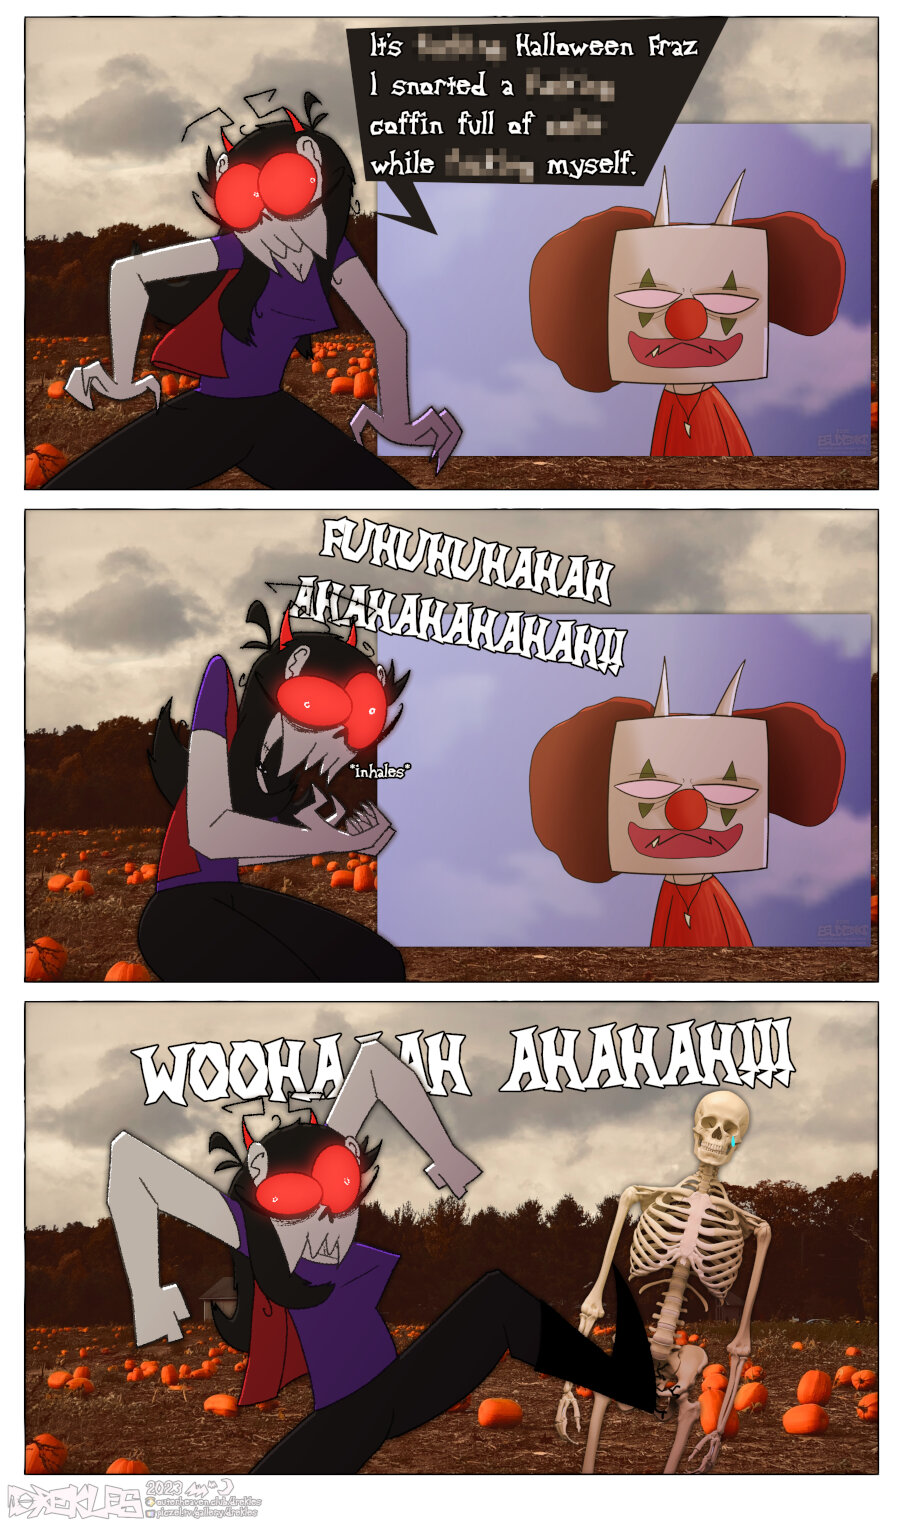 A 3 panel comic: In the first panel Cassie, a zombie girl, comes in and say to a PNG of Fraz in a clown costume 'It's [FLIPPING] Halloween Fraz! I snorted a [FLIPPING] coffin full of [COCA-COLA] while [FLIPPING] myself' She then proceeds to laugh maniacally in the second panel and kicks the pelvis of the Fraz PNG that just turned into a skeleton PNG in the third panel.